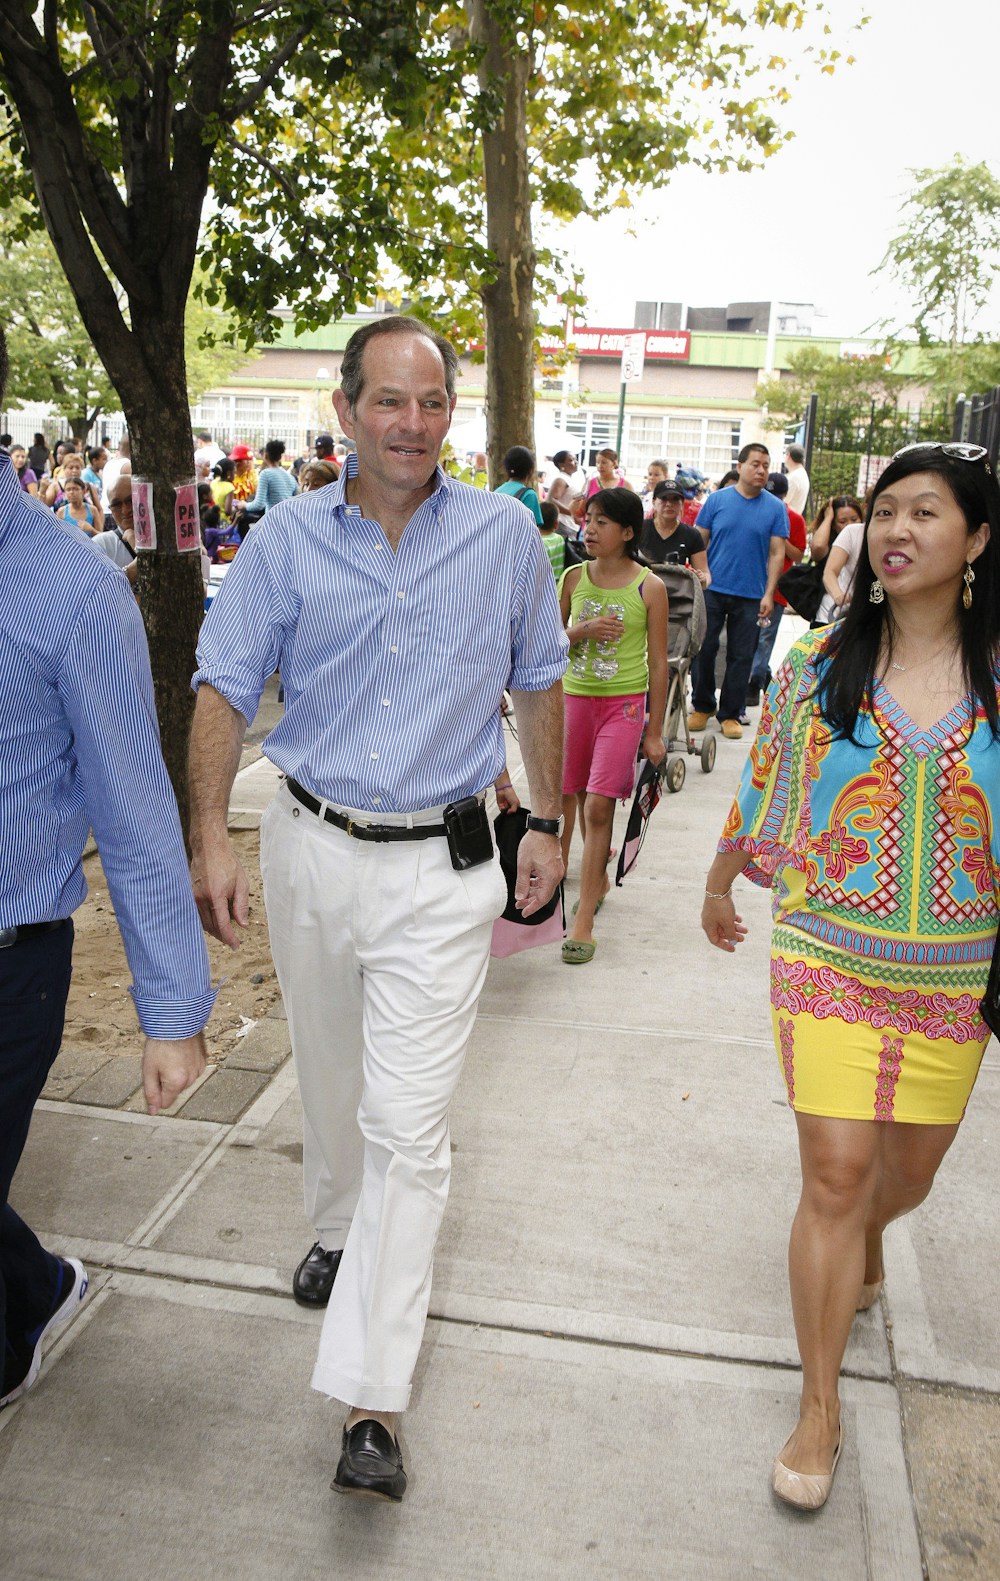 DDPJ9F Aug. 31, 2013 - Queens, New York, U.S - NYC Democratic candidate for Comptroller Eliot Spitzer, makes a brief campaign stop at a community event in the Corona section of Queens, NY. (Credit Image: © Angel Chevrestt/ZUMAPRESS.com)